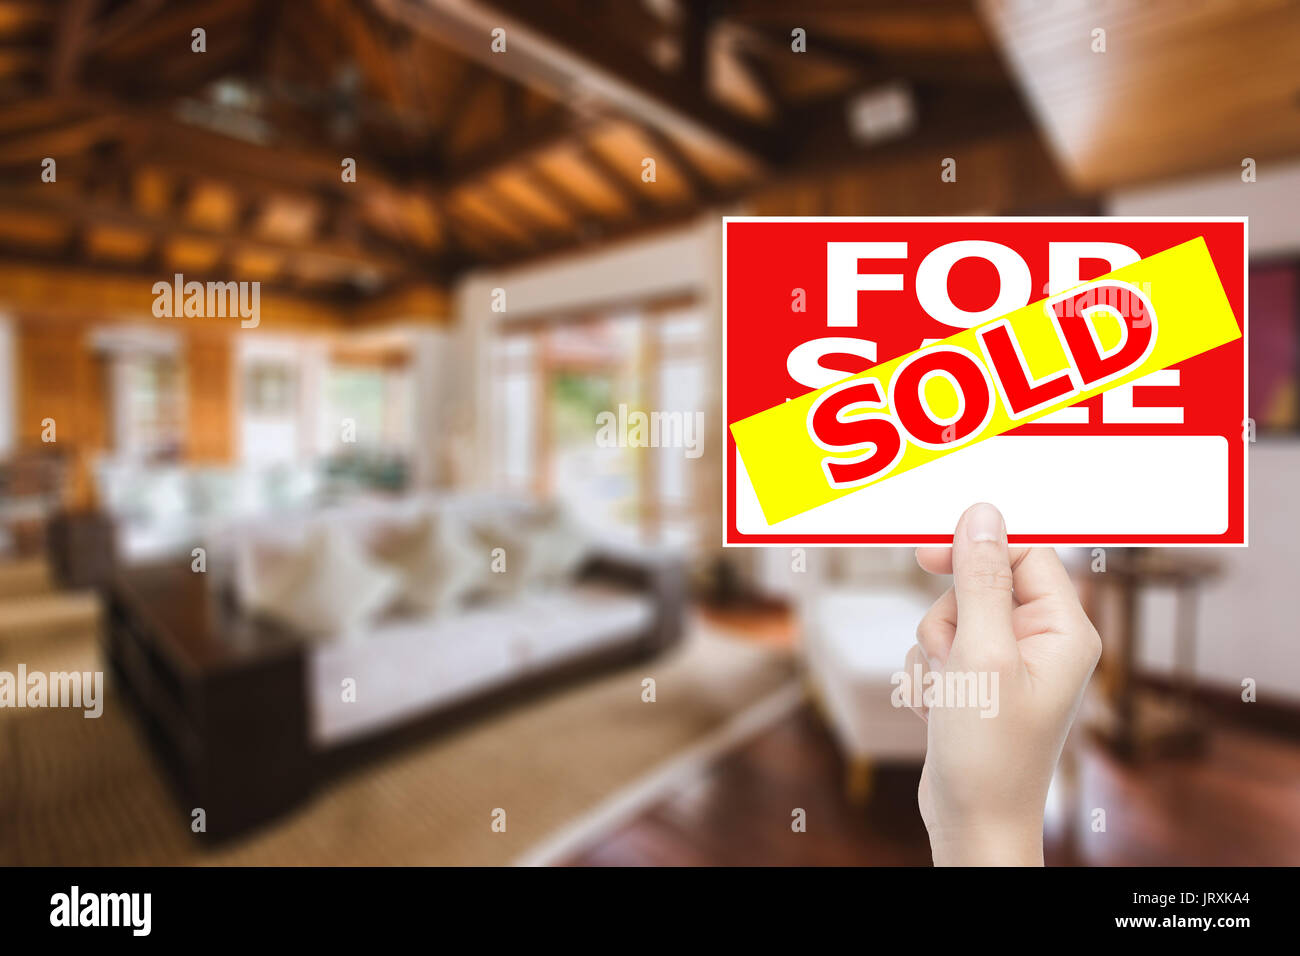 hand holding sold house sign Stock Photo